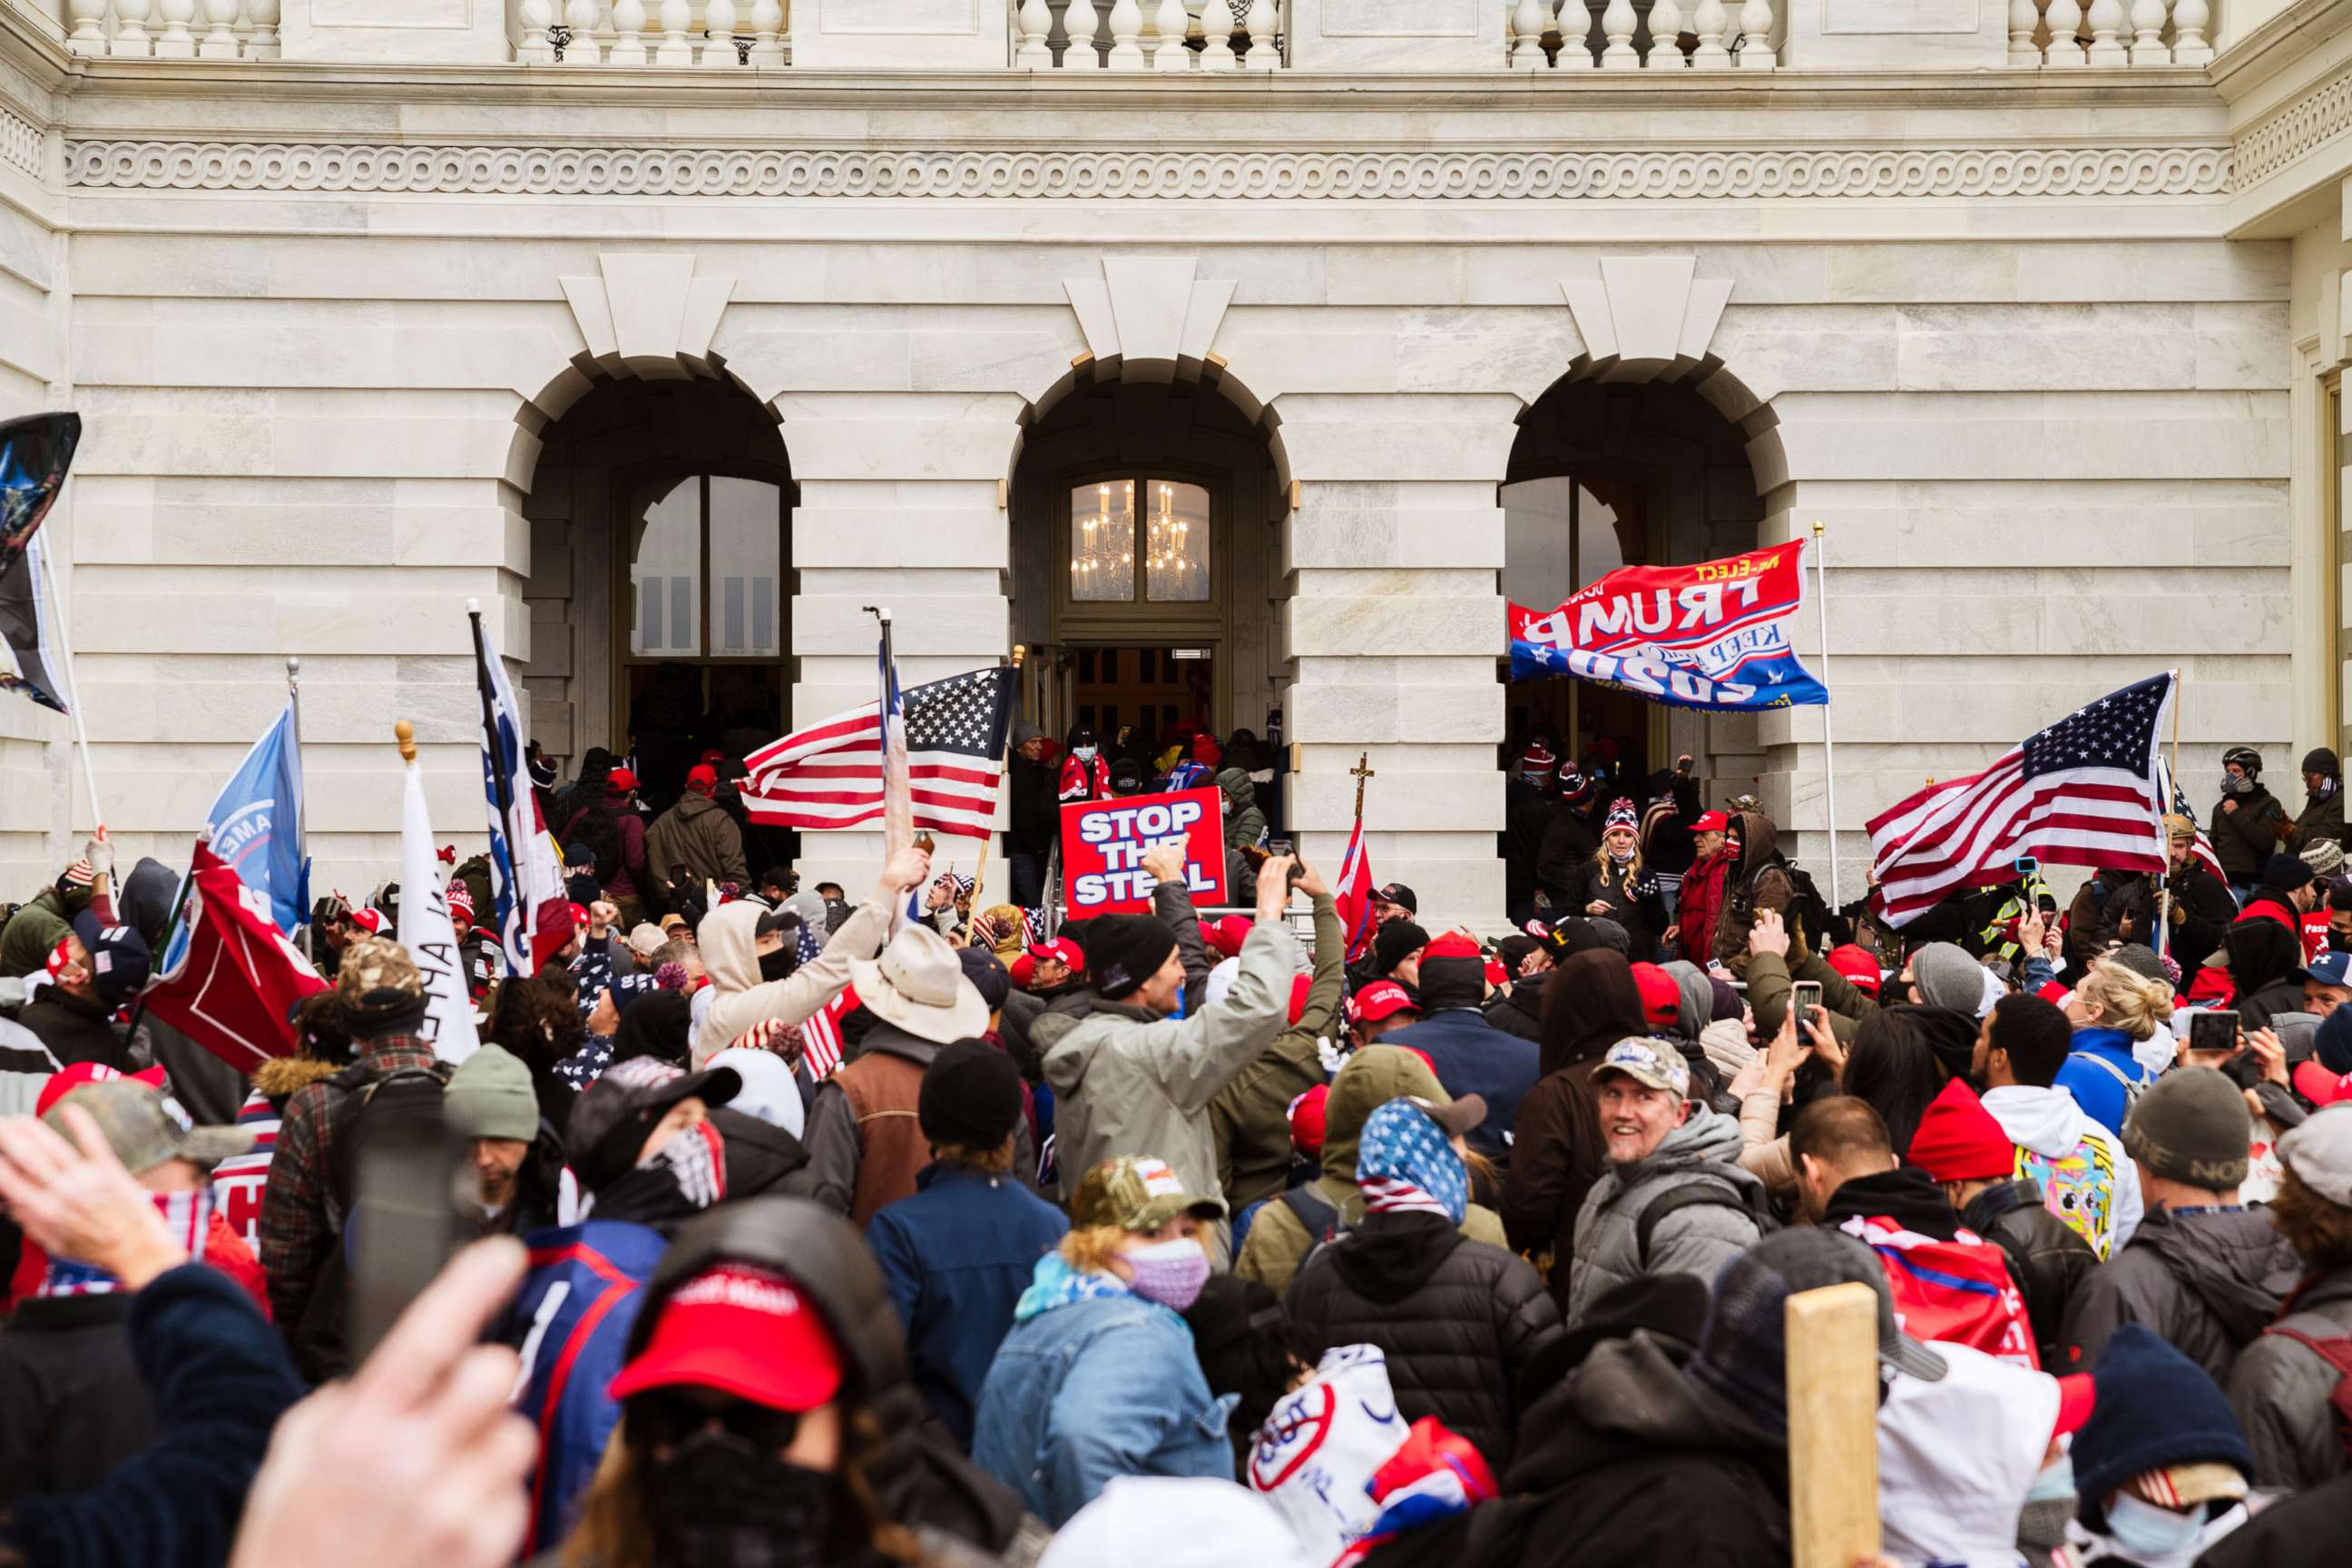 PHOTO: Supporters of President Donald Trump flood into the Capitol Building after breaking into it on Jan. 6, 2021, in Washington, D.C.